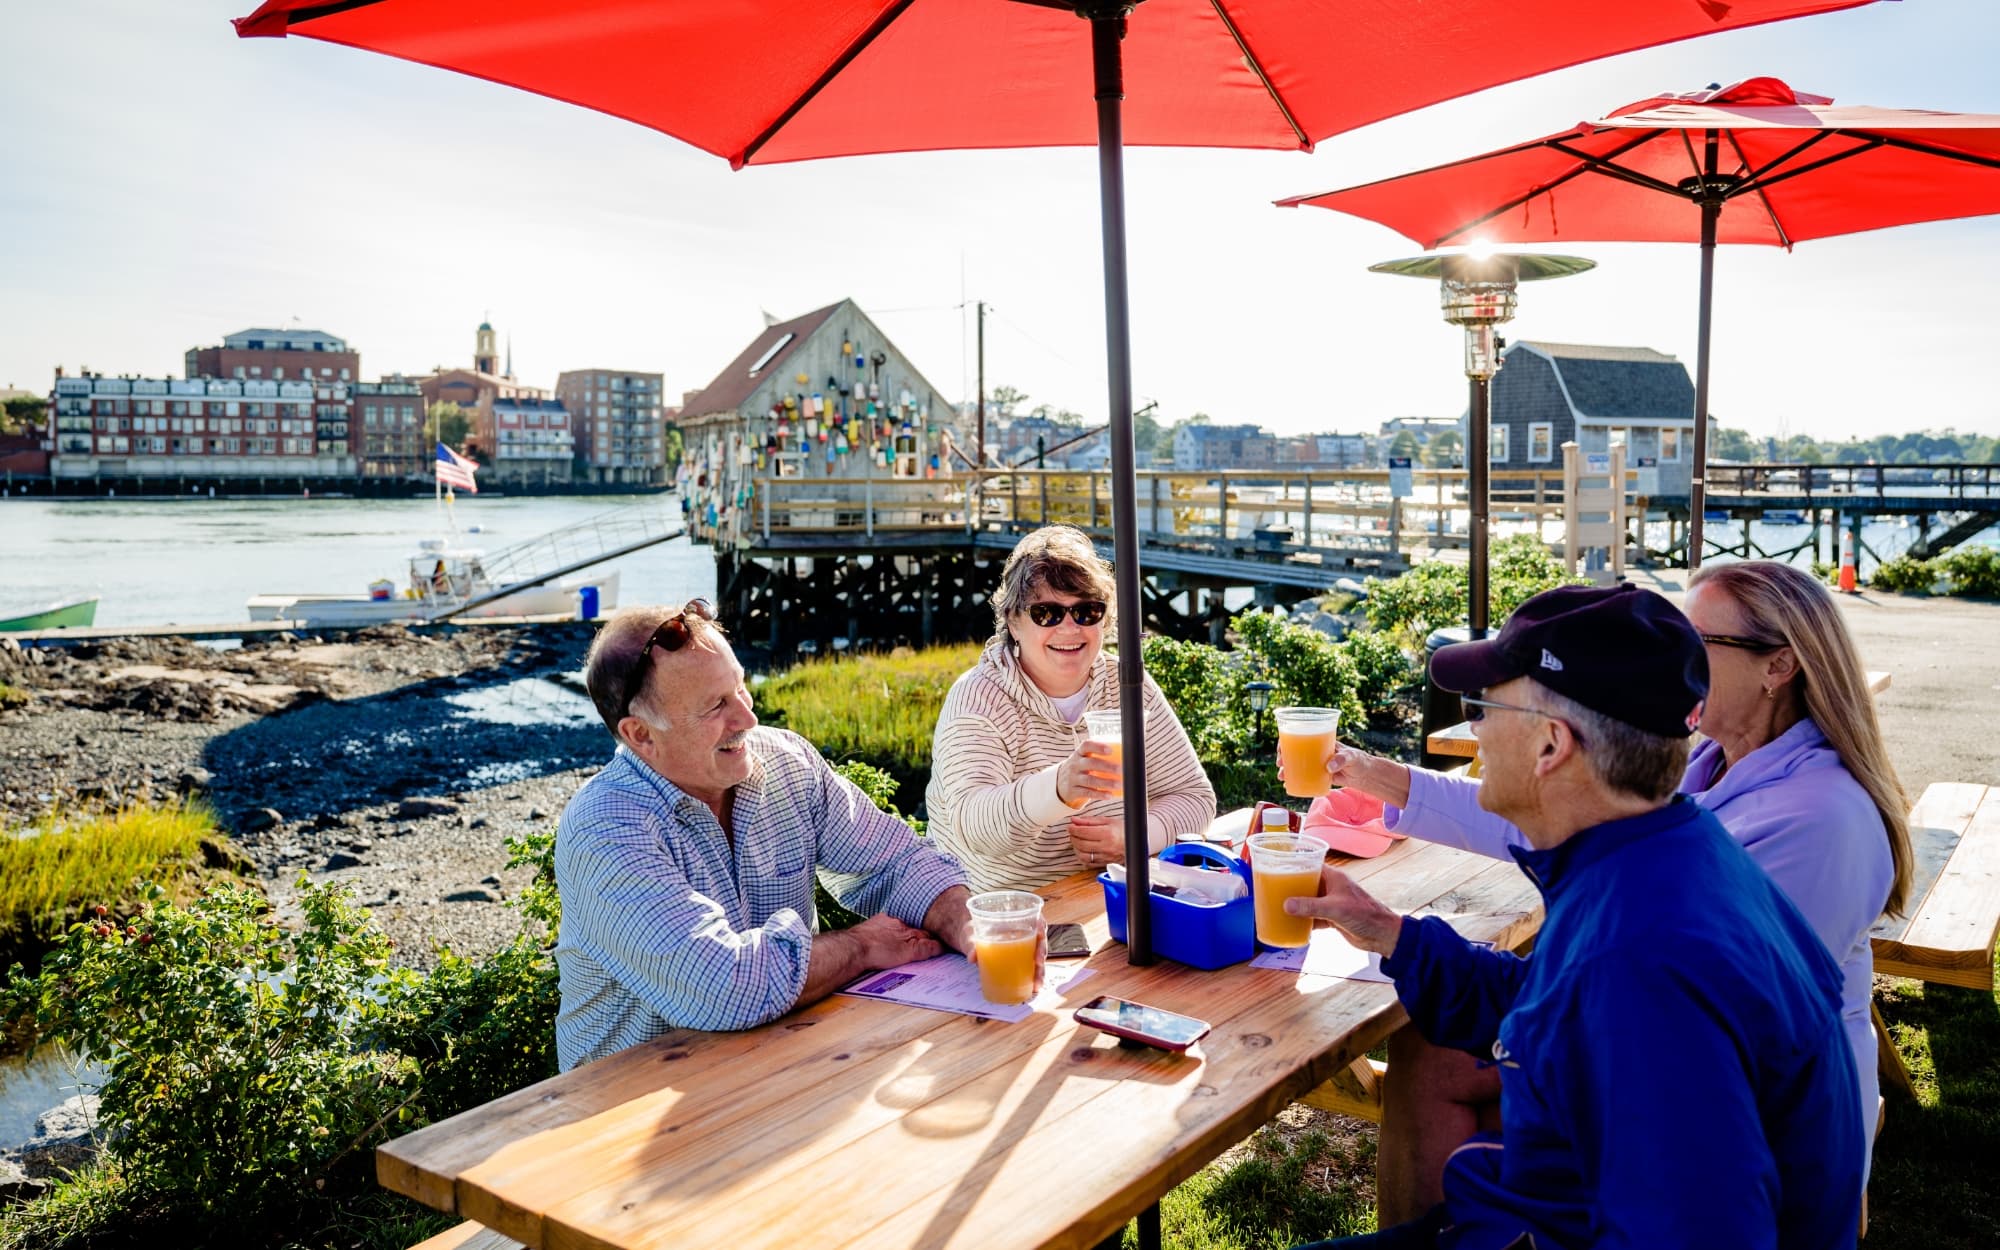 Four patrons are smiling while seated outside in front of an ocean view at the Buoy Shack. They are offering cheers with their beverages.